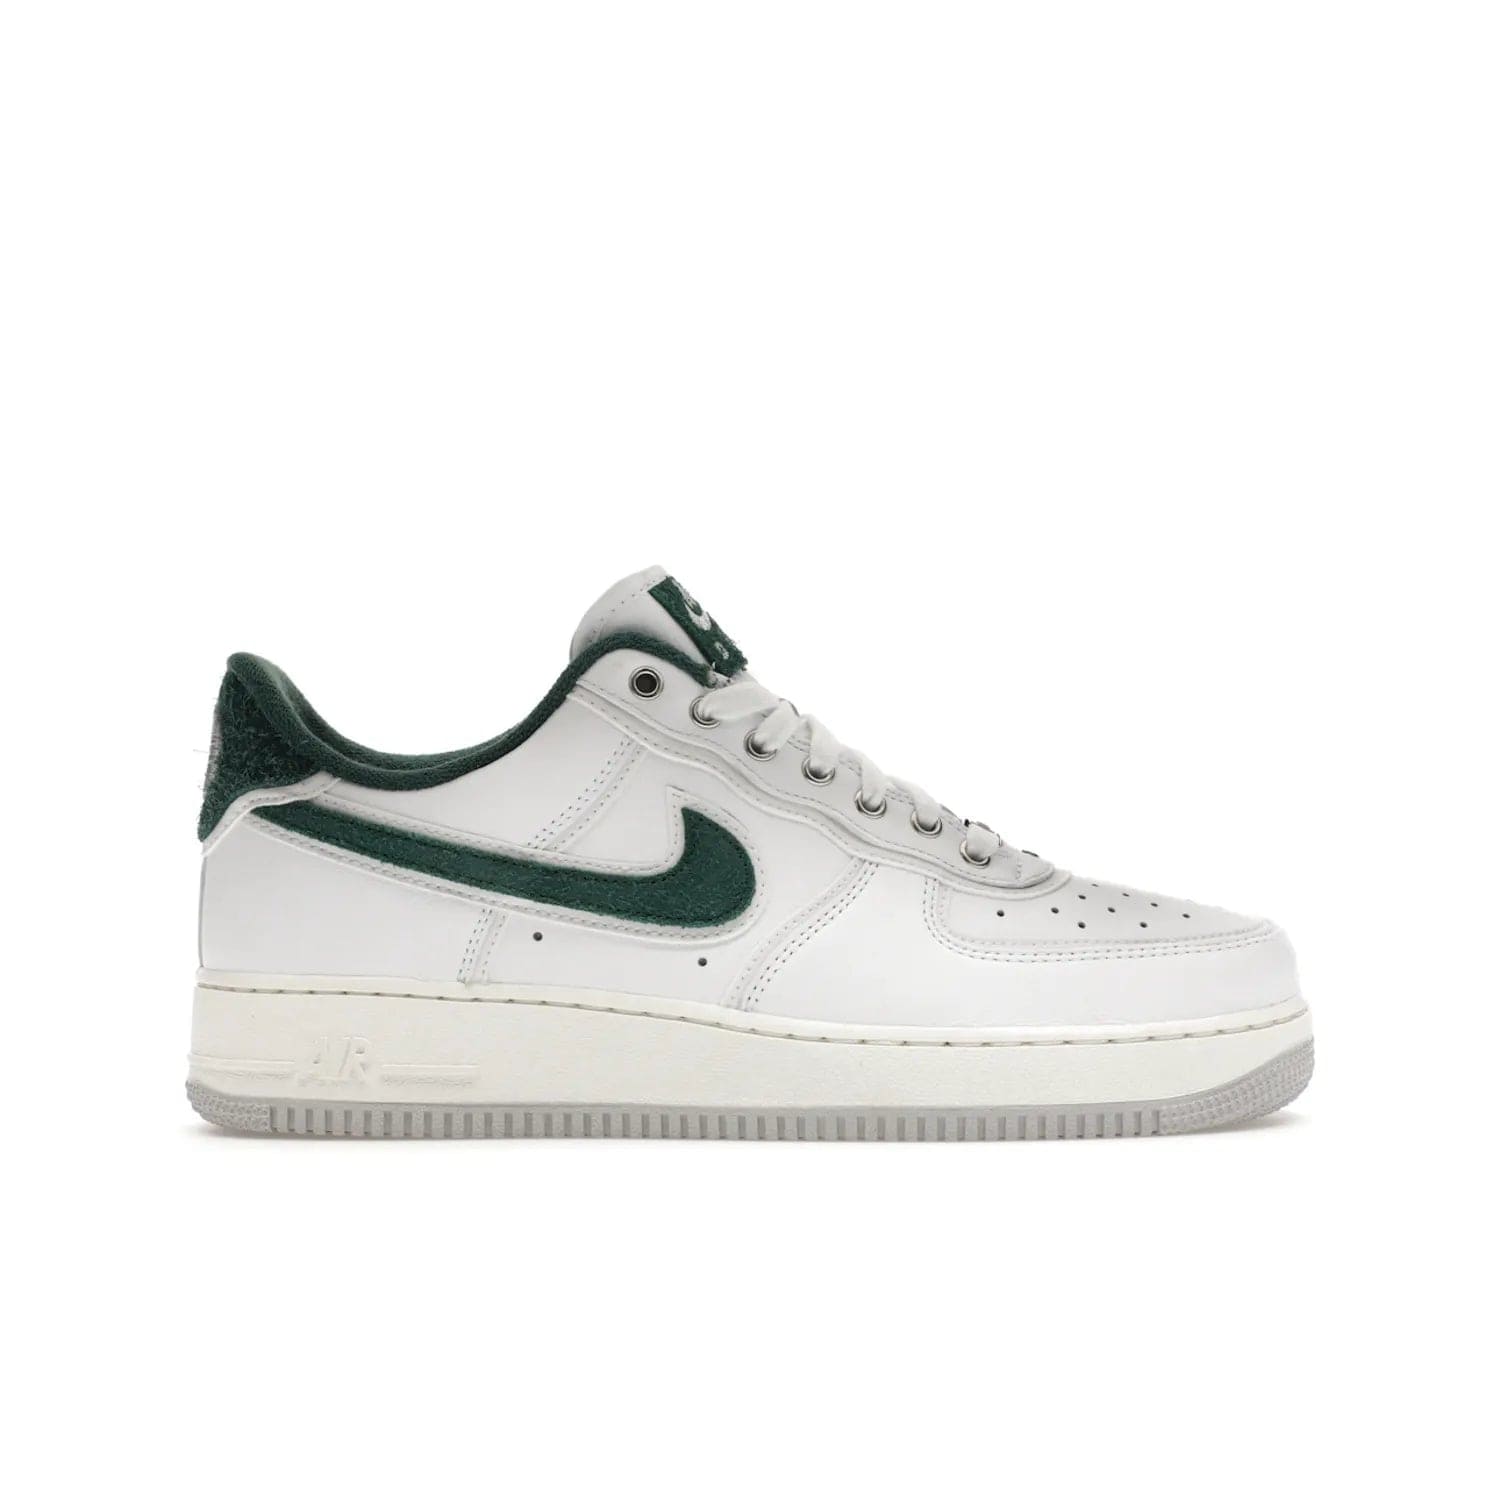 Nike Air Force 1 Low '07 Premium University of Oregon PE - Image 1 - Only at www.BallersClubKickz.com - The Nike Air Force 1 Low '07 Premium. Special Oregon University colorway. White base with green and sail accents. Cushioned rubber midsole. Comfort and style. Support your school!